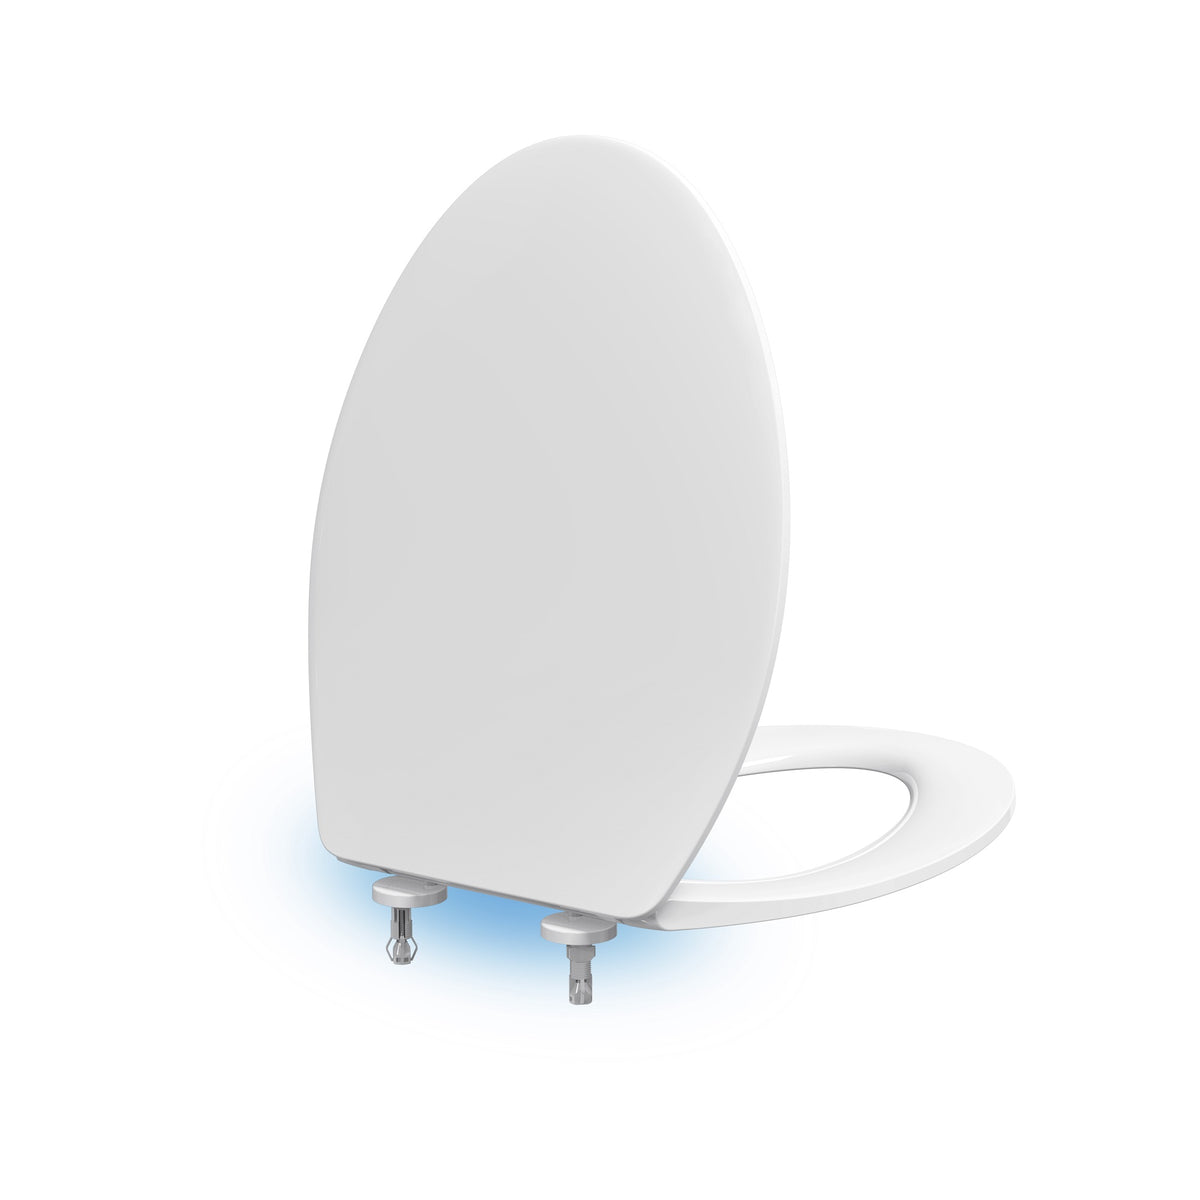 R&T B1133 Elongated Toilet Seat with Night Light